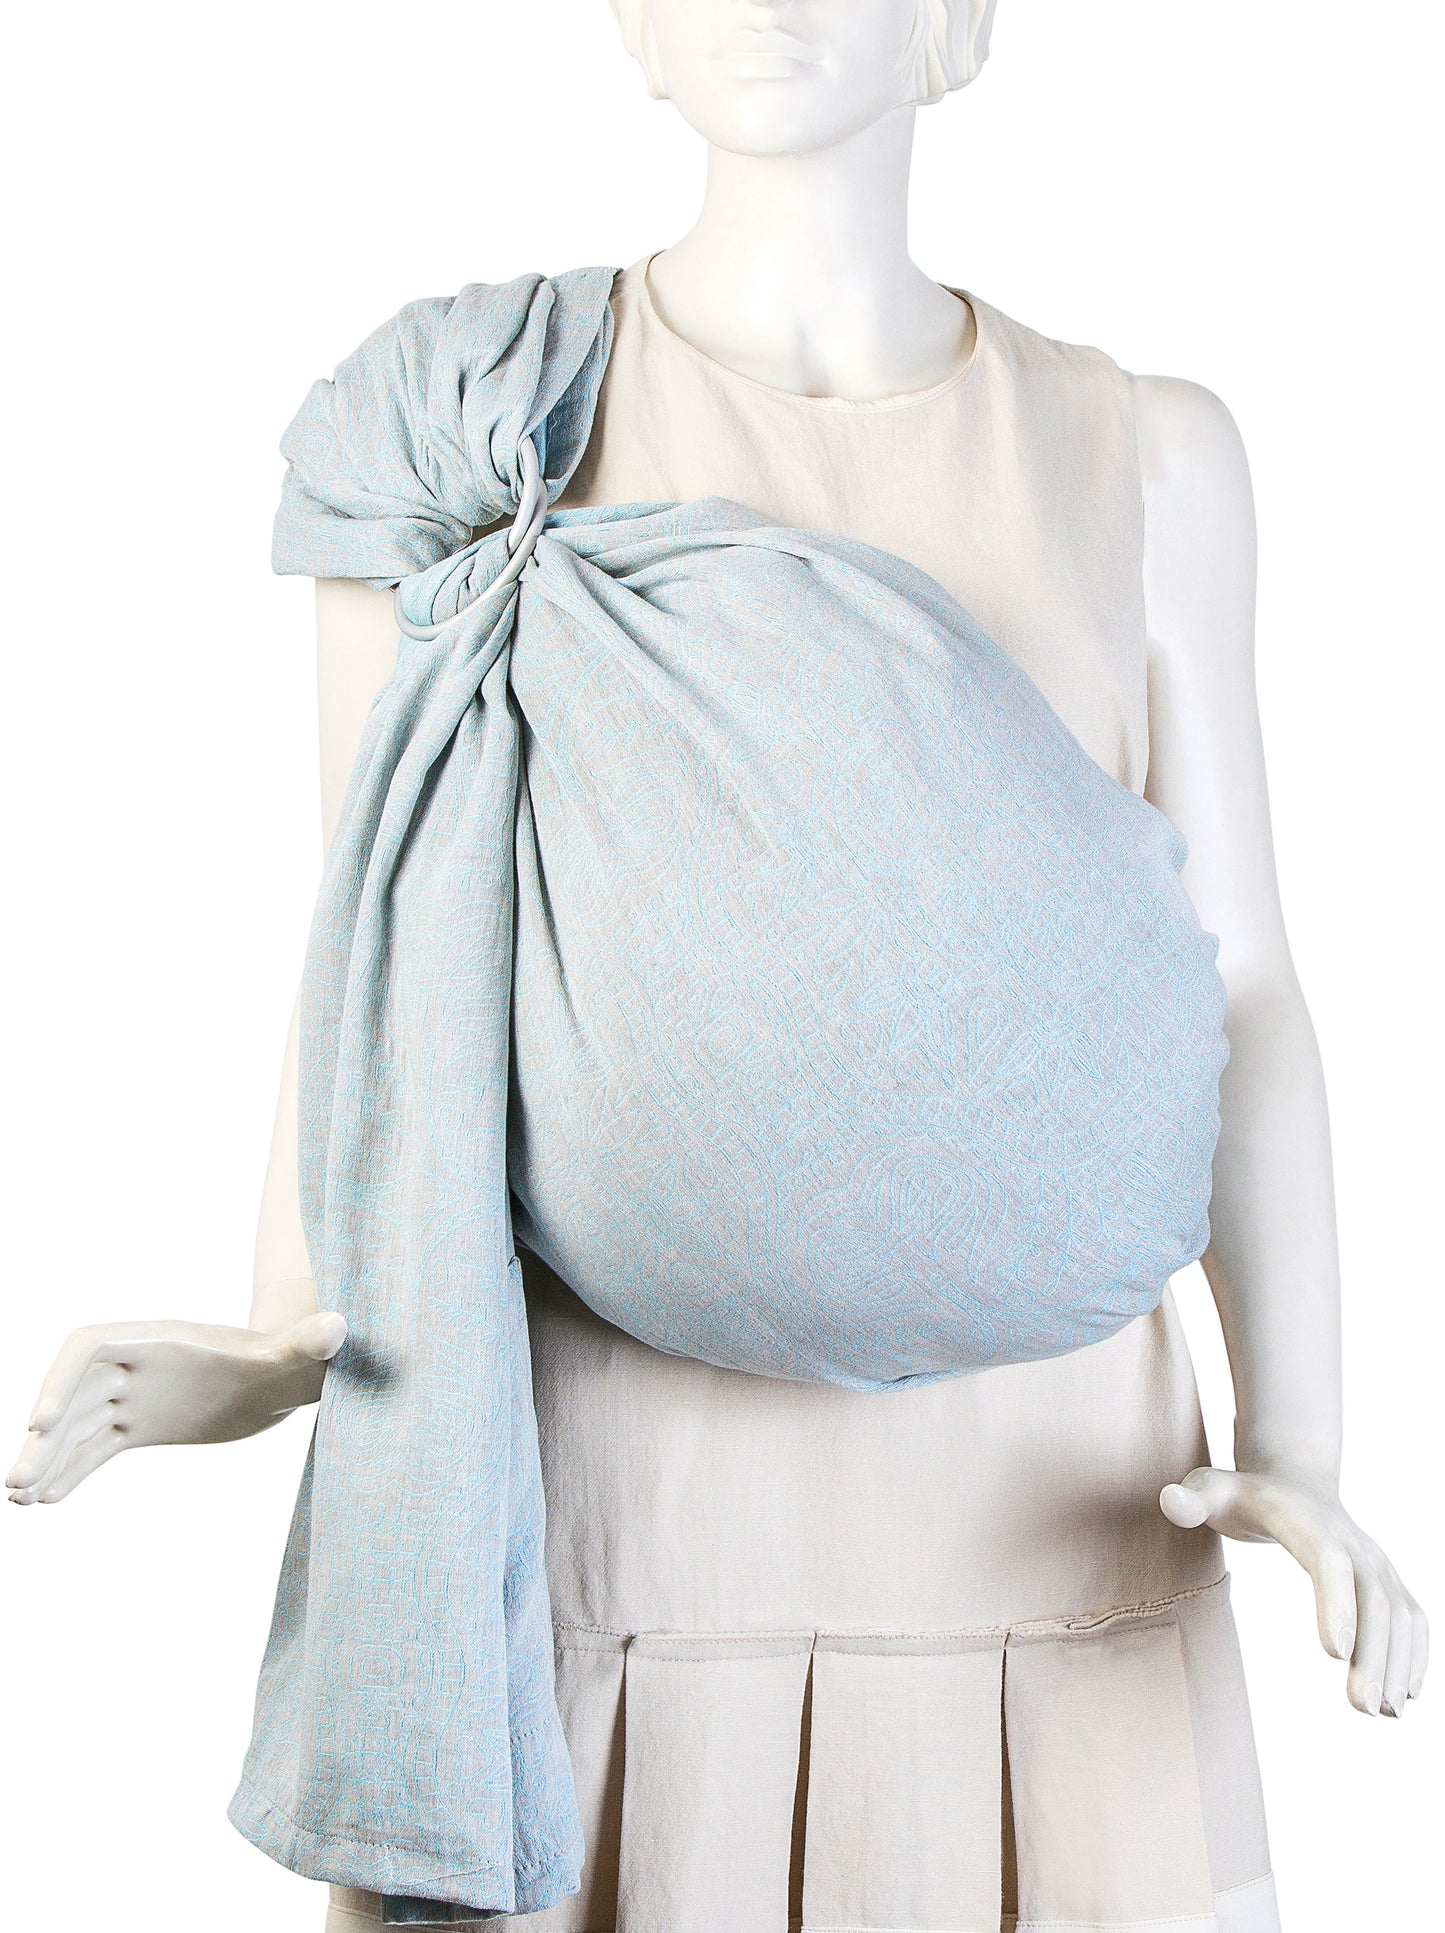 Light Blue Baby Sling and Ring Sling 100% Cotton Muslin baby Carrier Suitable from Newborn to Toddler